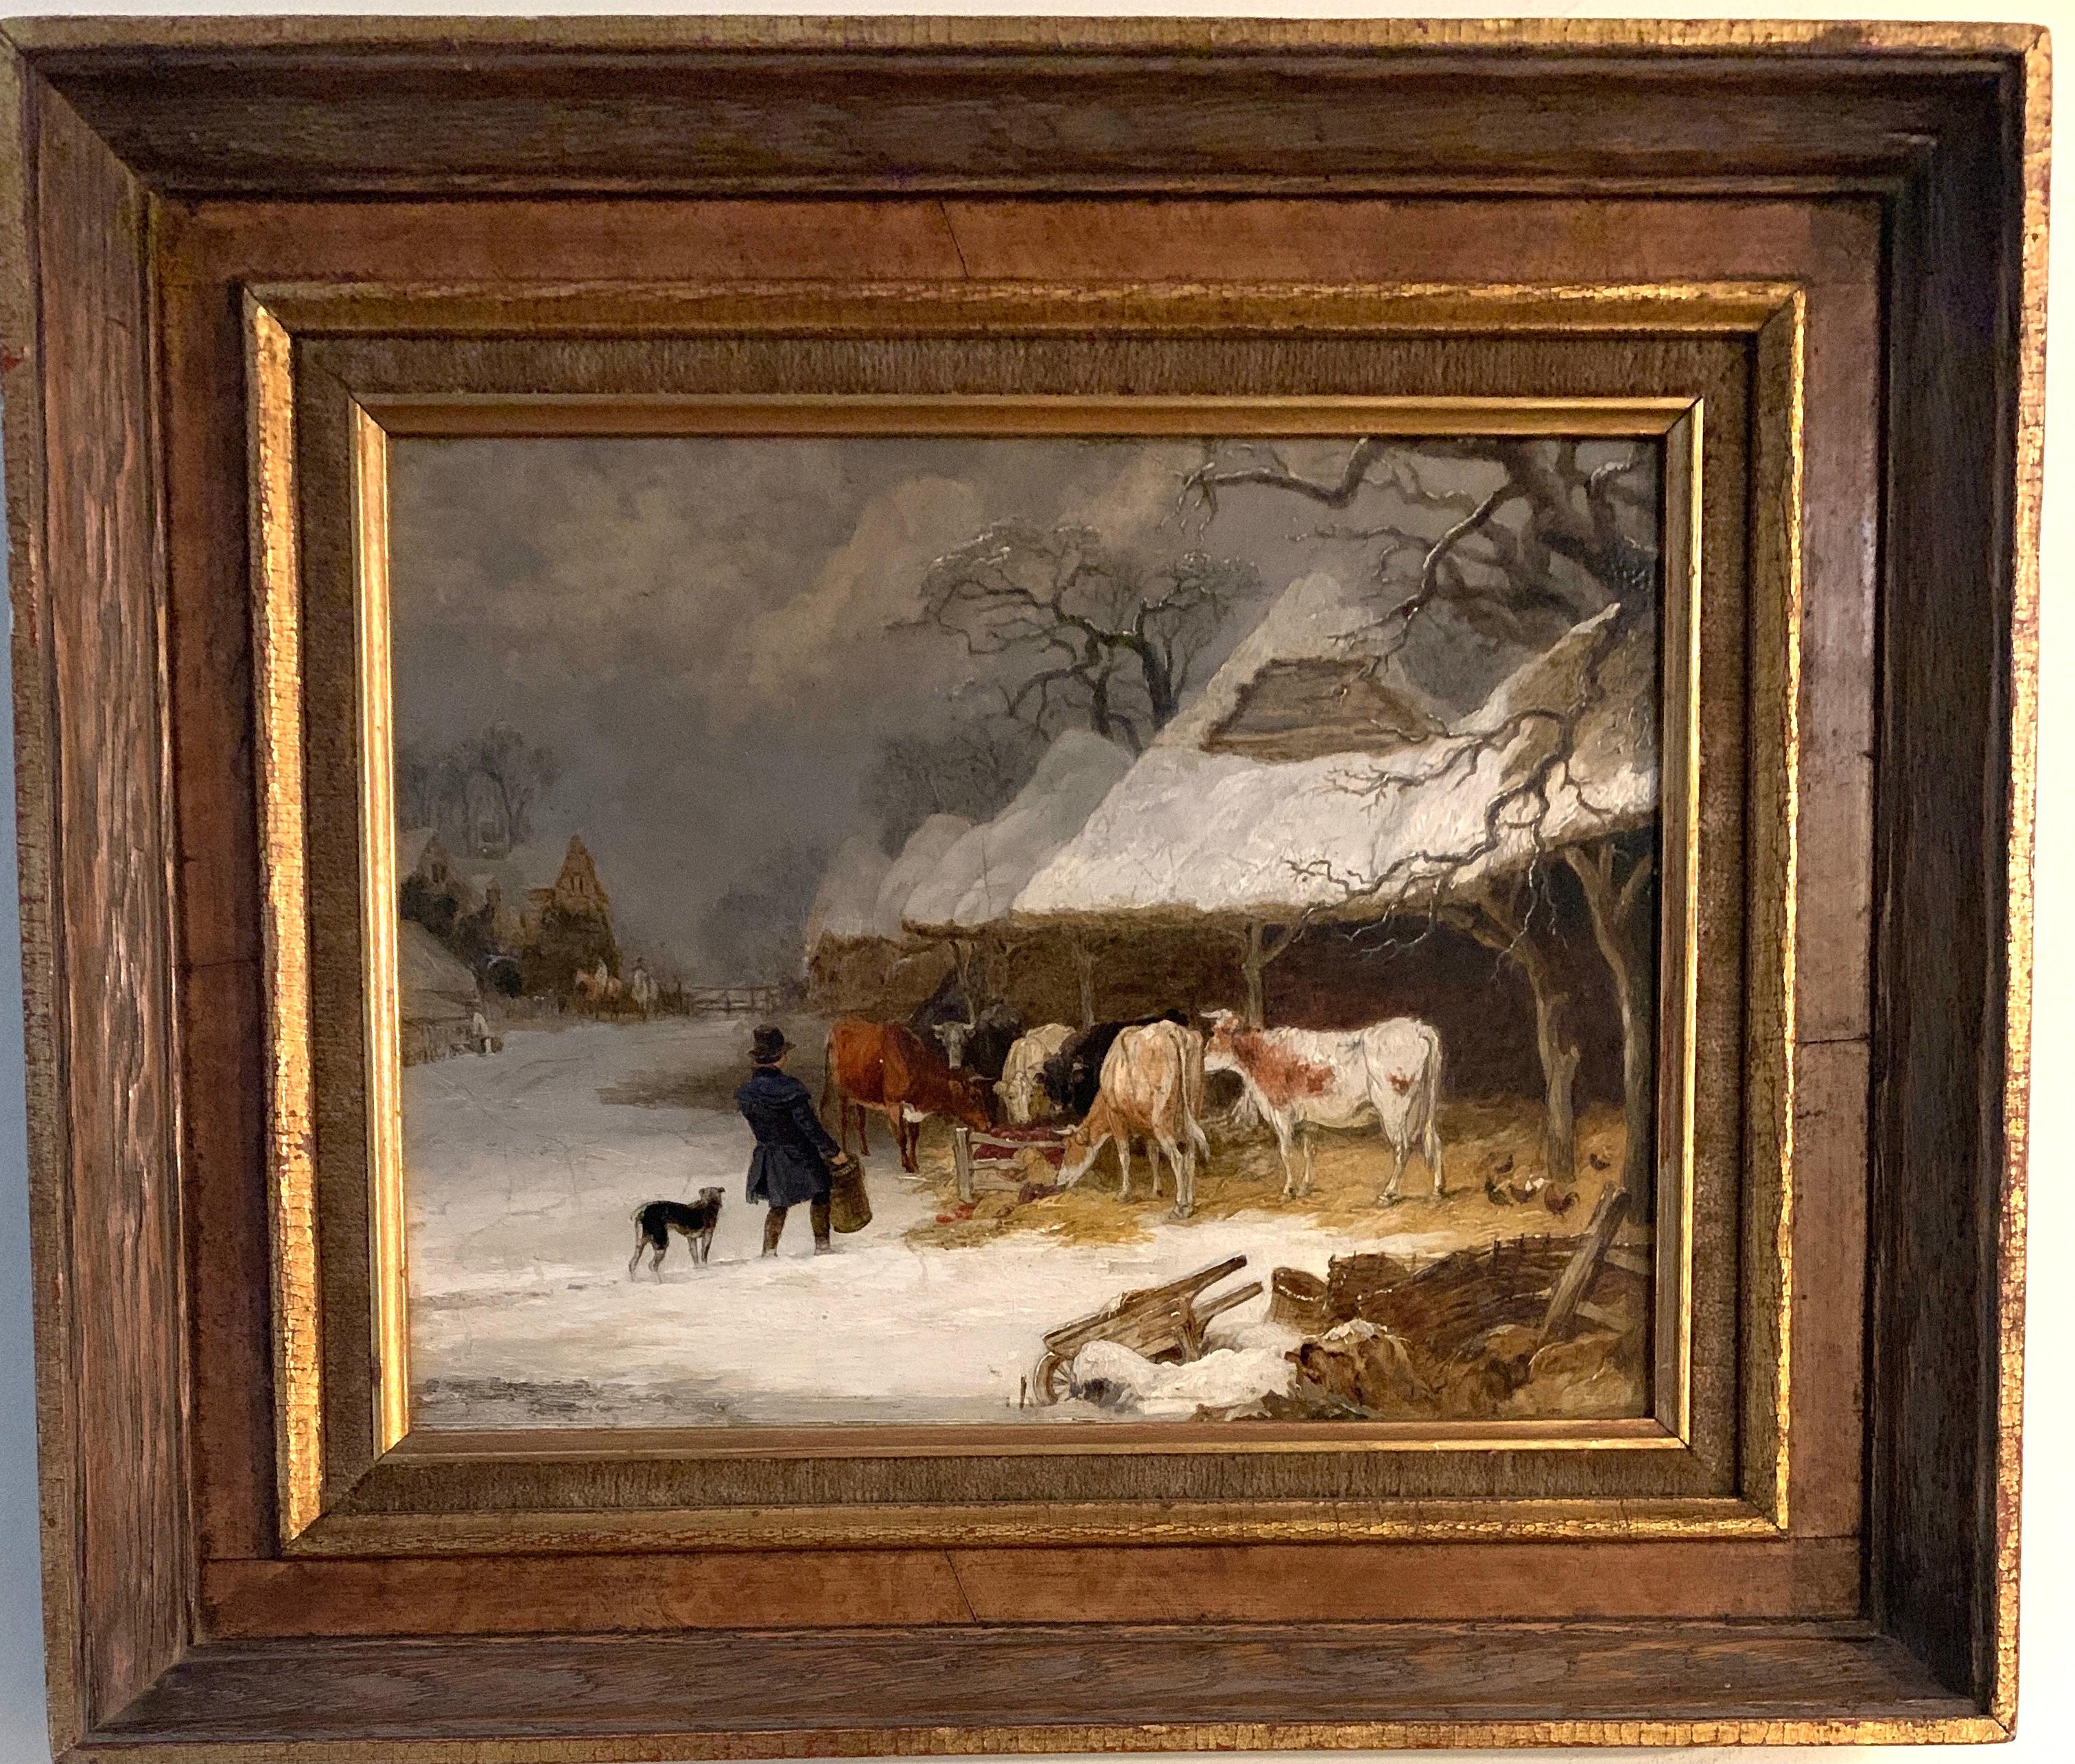 Edmund Bristow Landscape Painting - English 19th century landscape in oils of a man feeding the cows in the snow